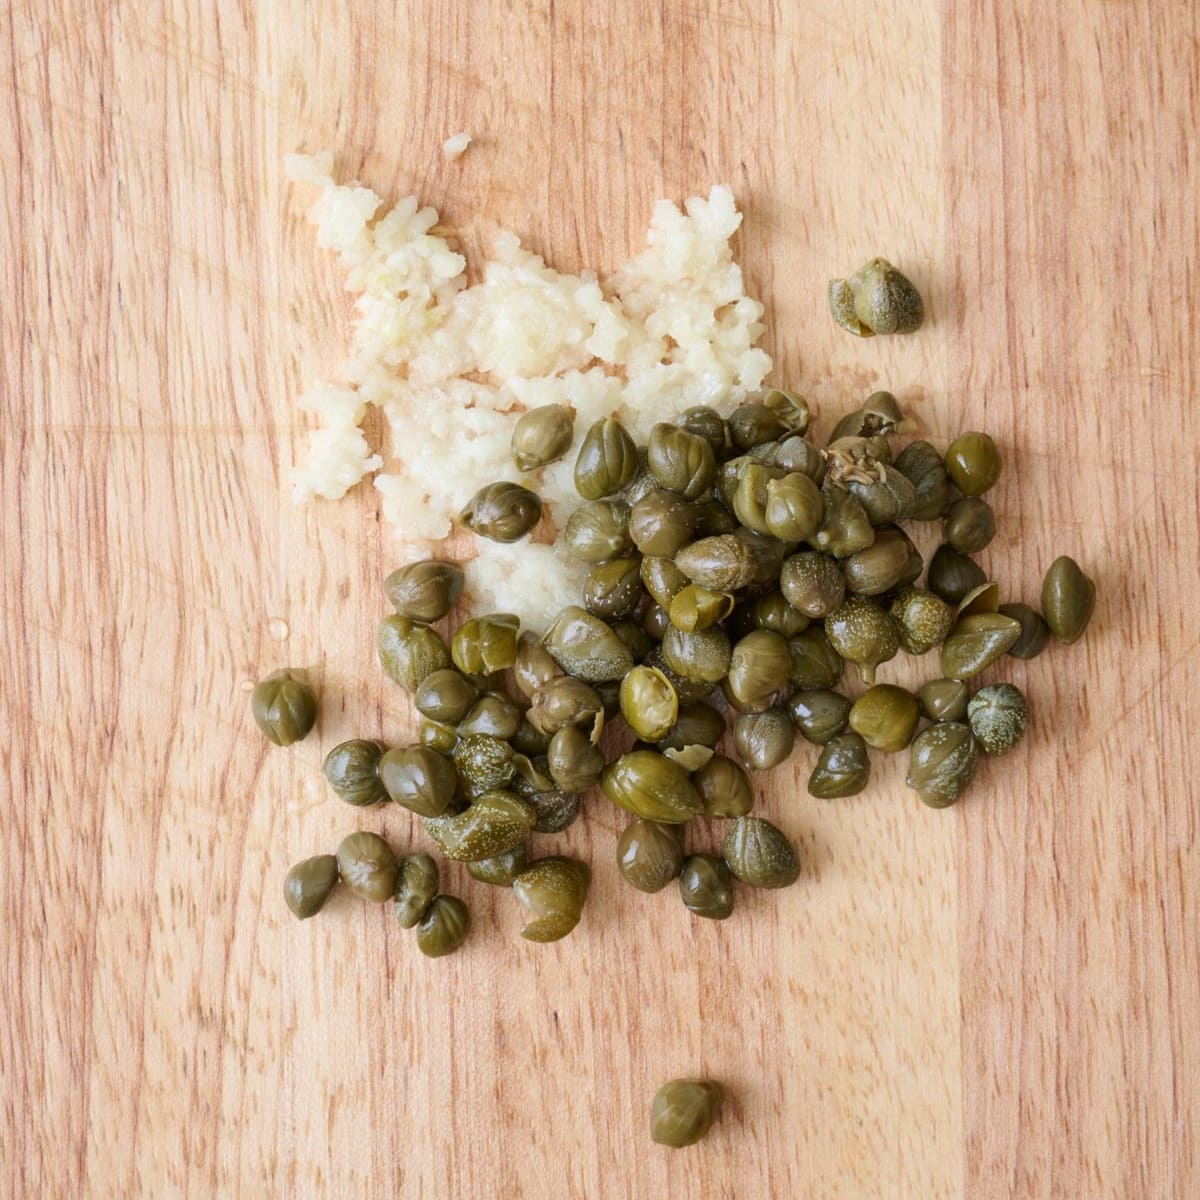 Minced garlic and capers on a wooden cutting board.